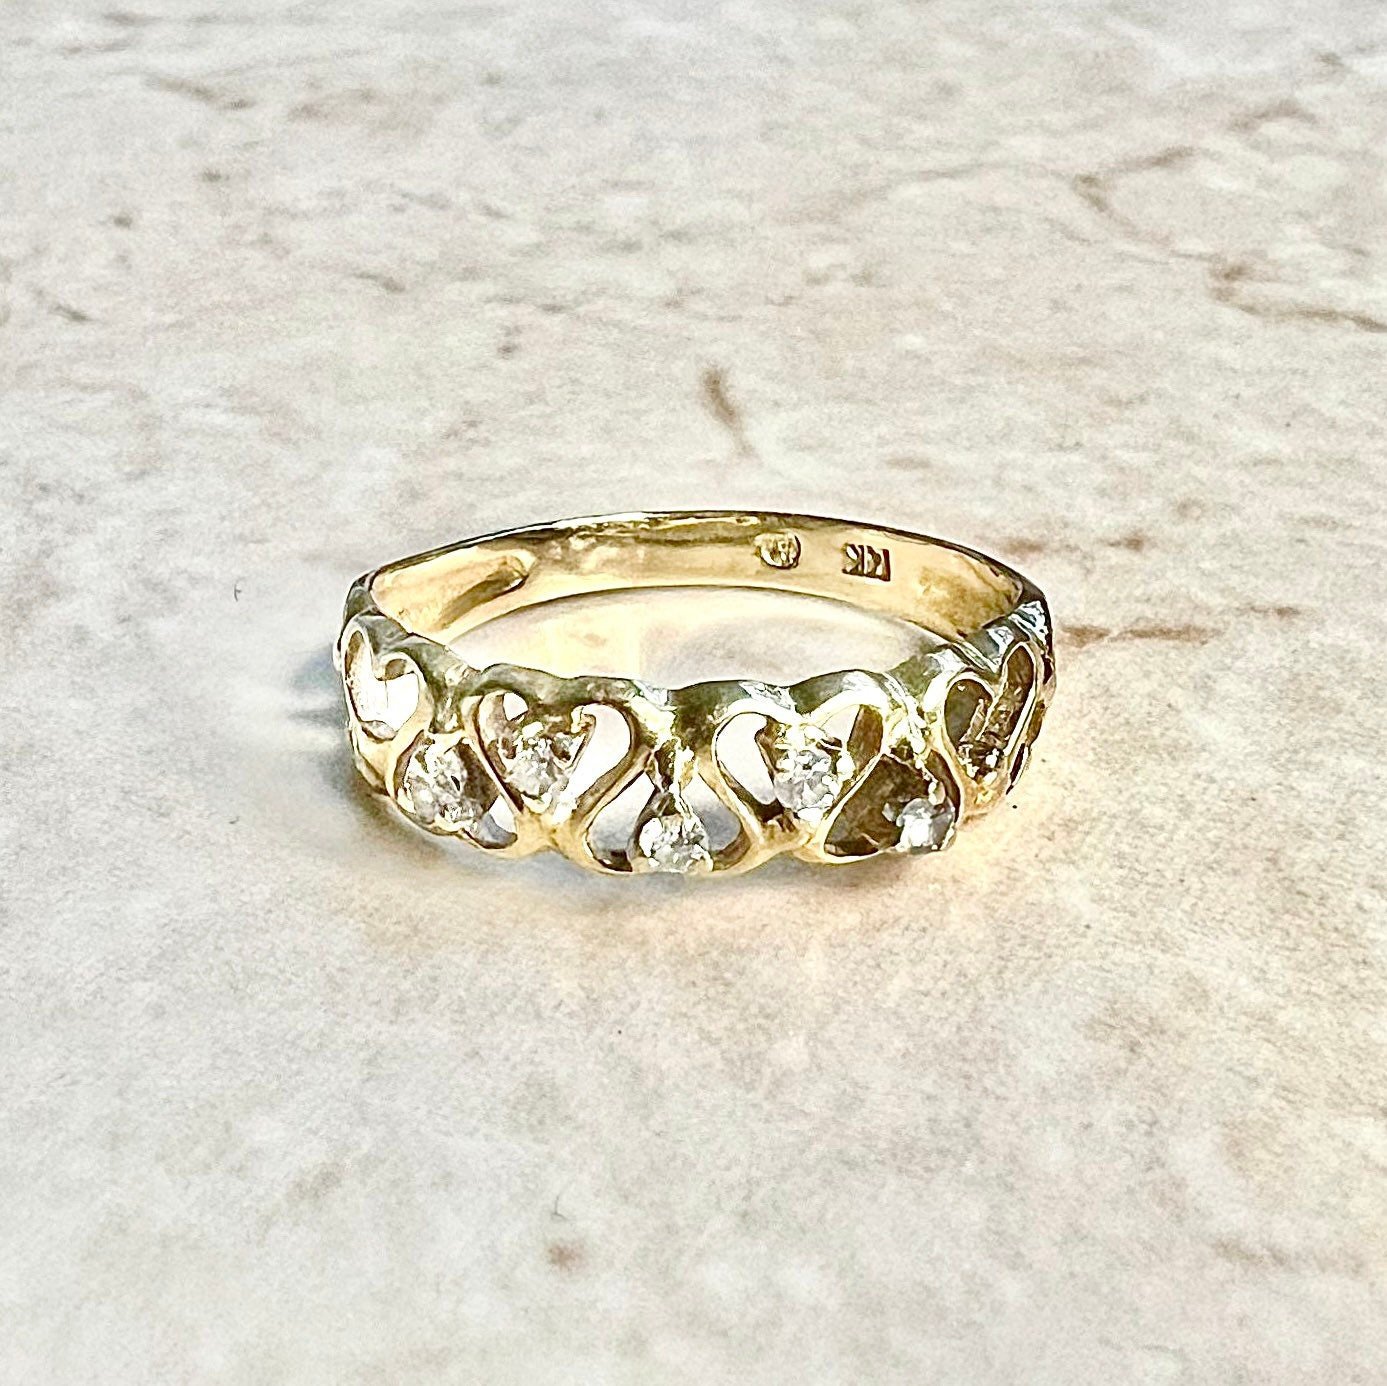 14K Diamond Heart Band Ring - Yellow Gold Diamond Ring - Diamond Band - Heart Ring - Diamond Promise Ring - Valentine’s Day Gifts For Her